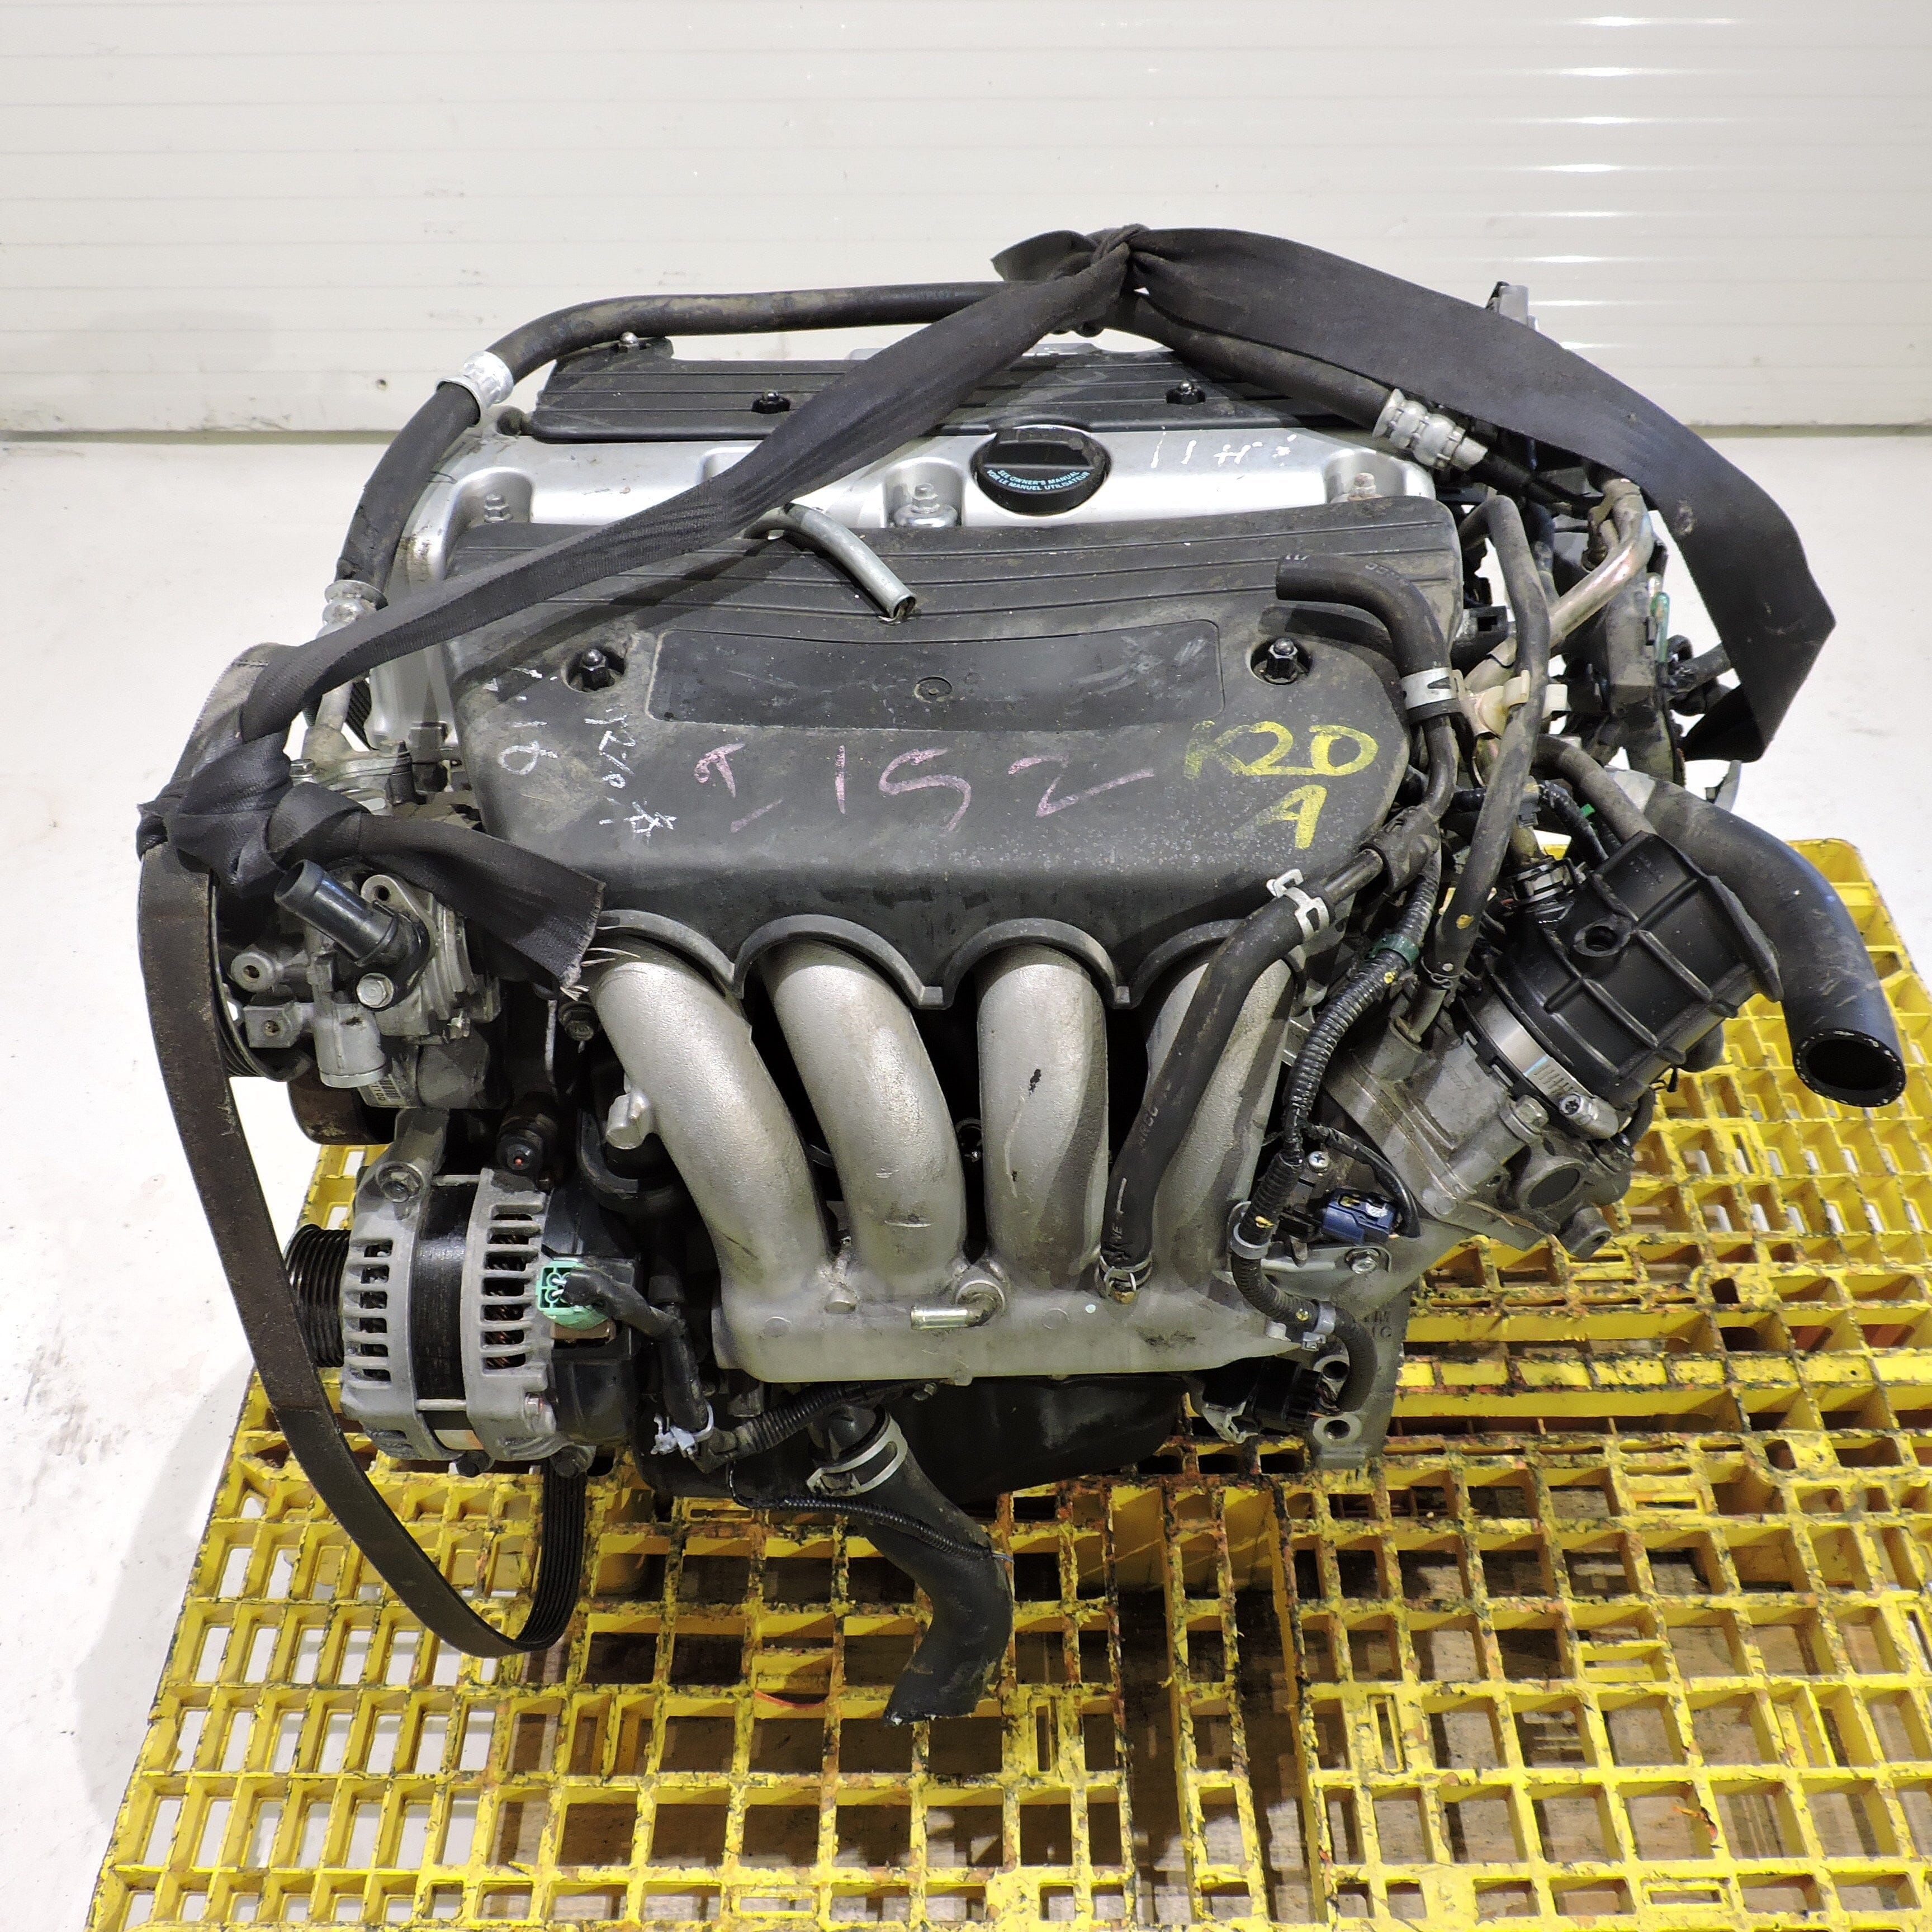 Honda Cr-V 2002-2006 2.0L JDM Replacement Engine For 2.4L - K20a - 2.0 - 11